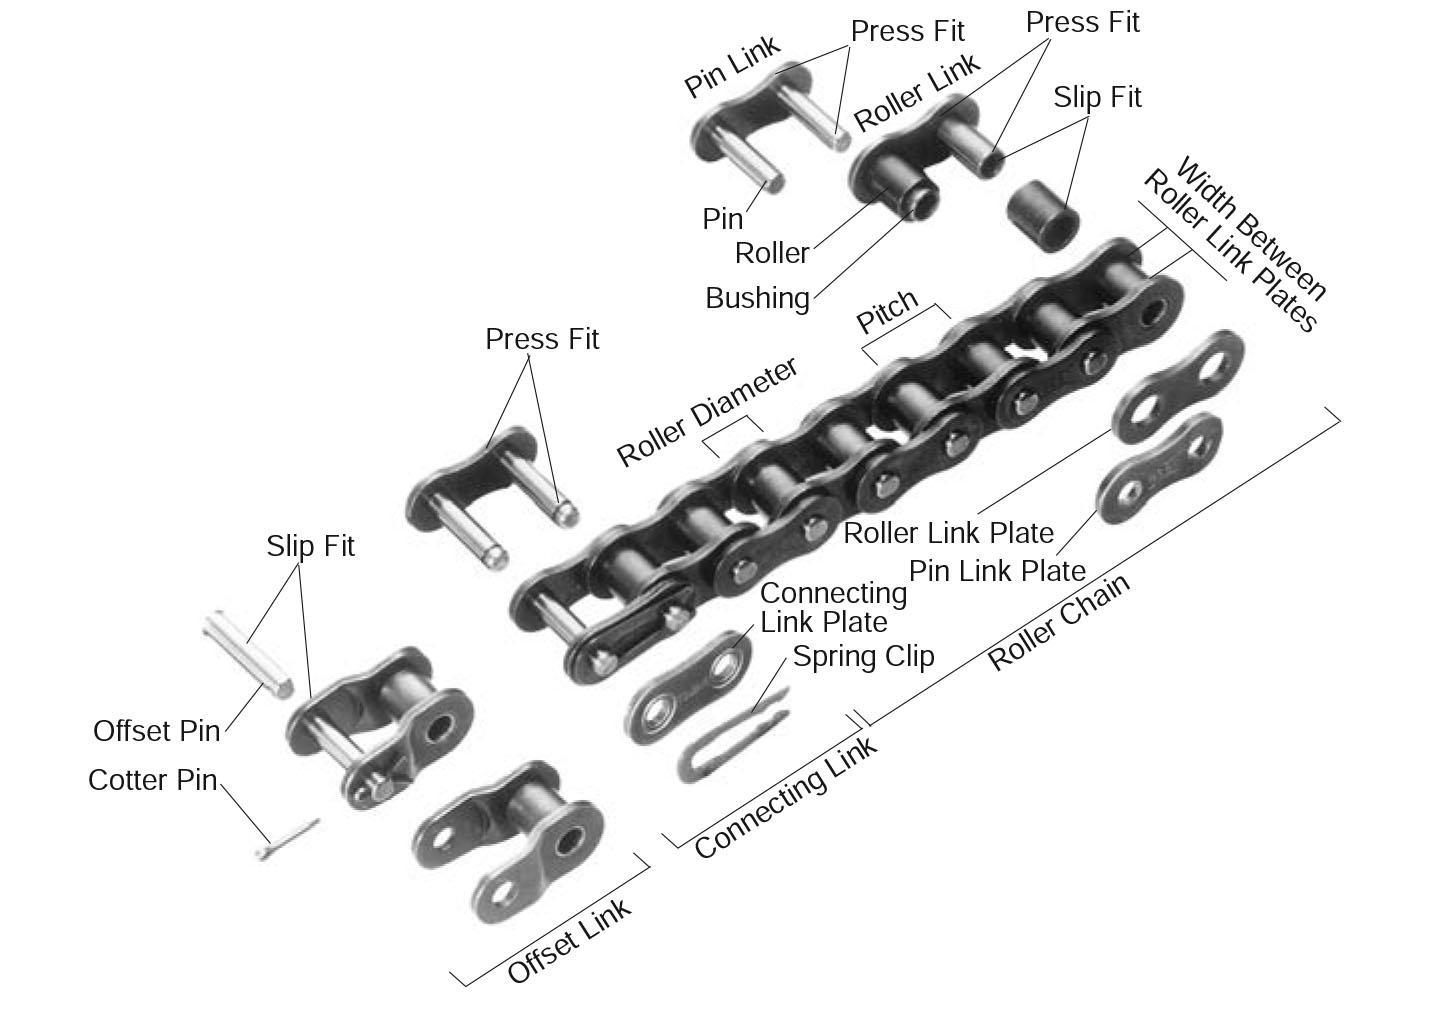 The parts that make up a roller chain are laid out separately and labeled.